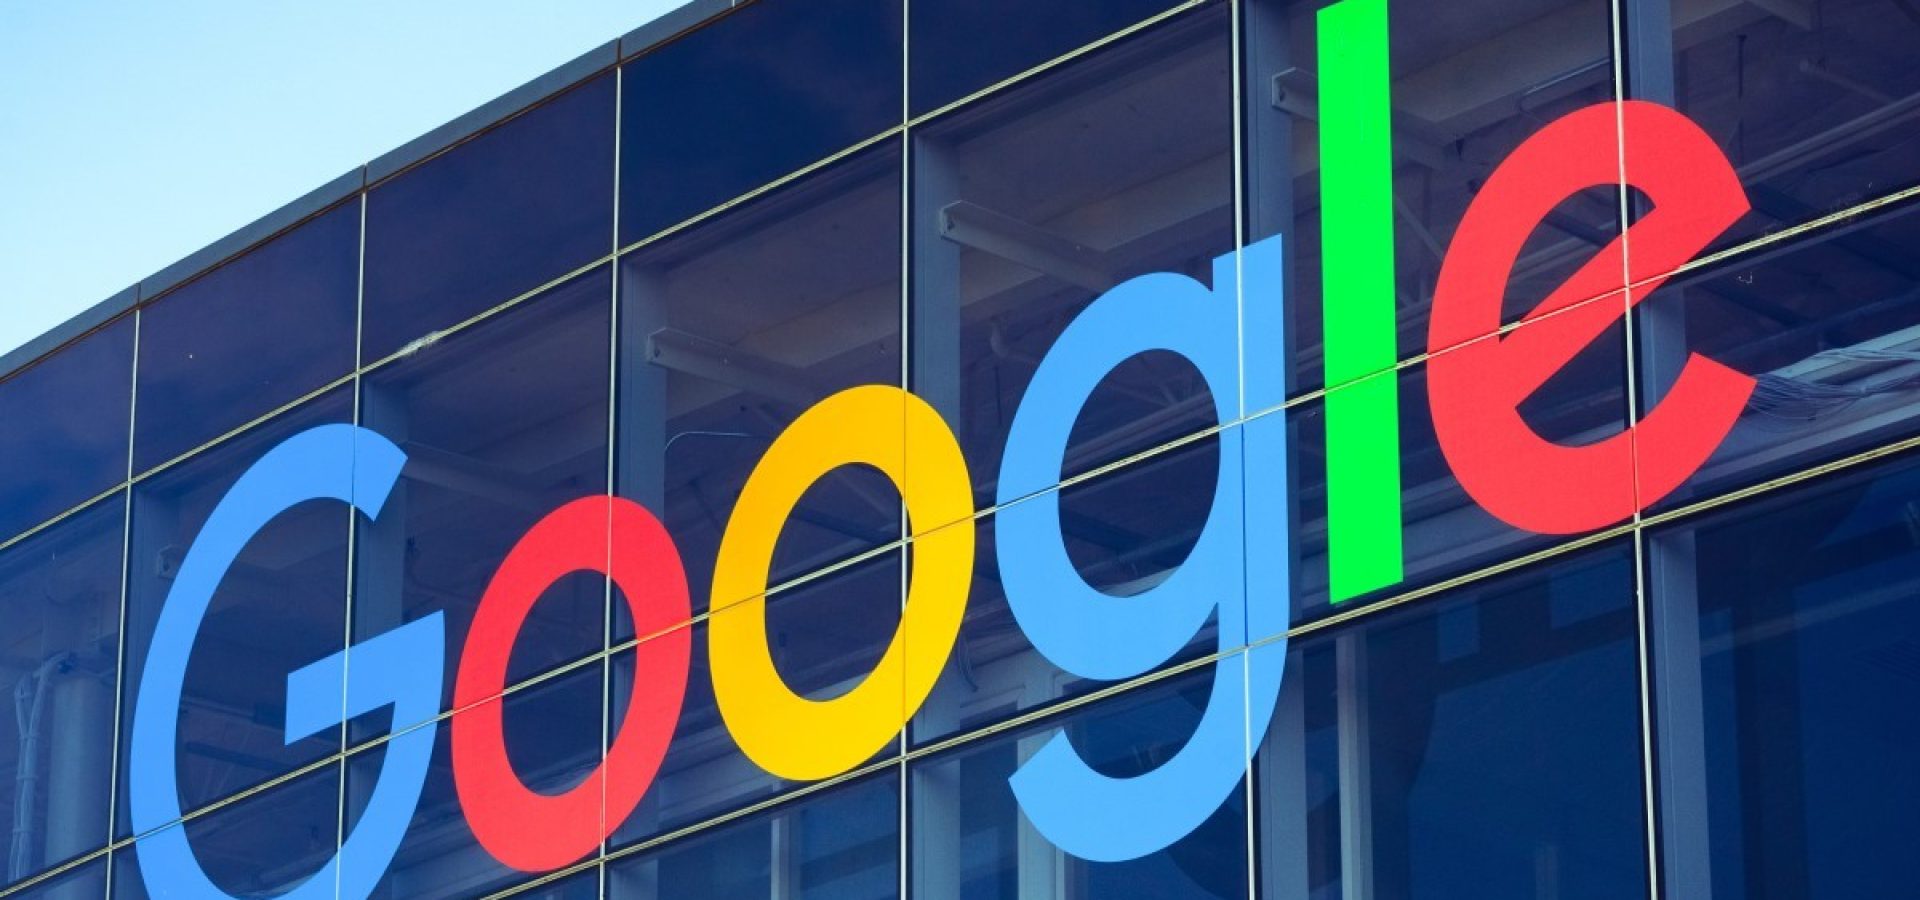 Google will launch an app that will identify skin conditions